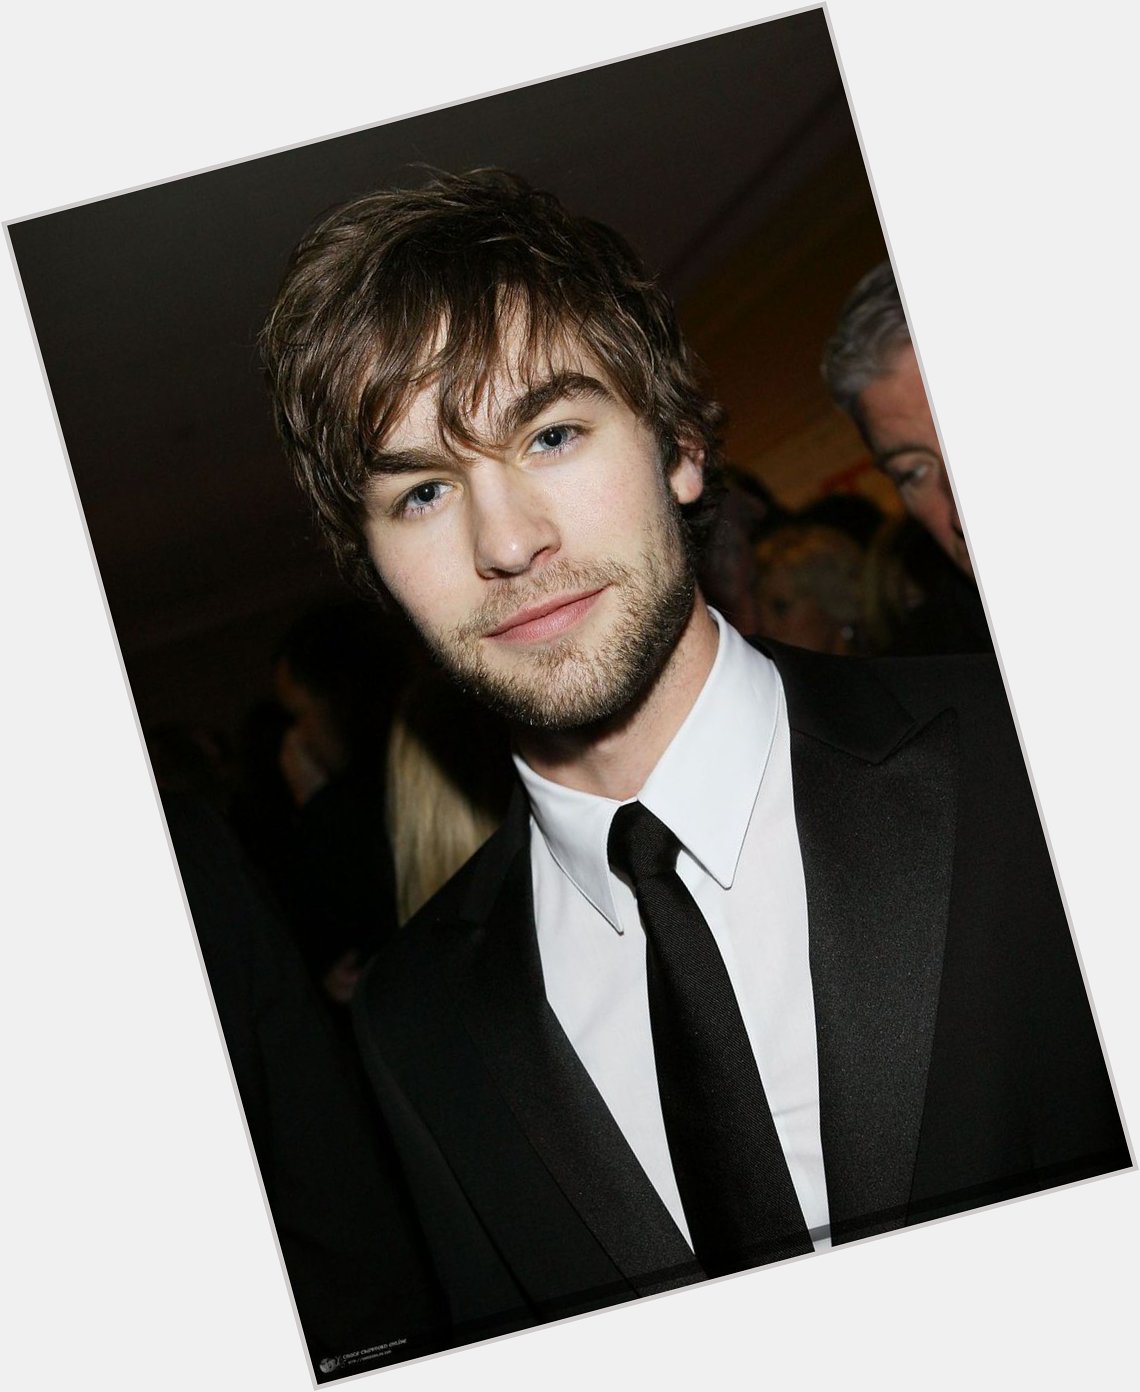 Happy Birthday Chace Crawford.
The first Internet favorite white boy 